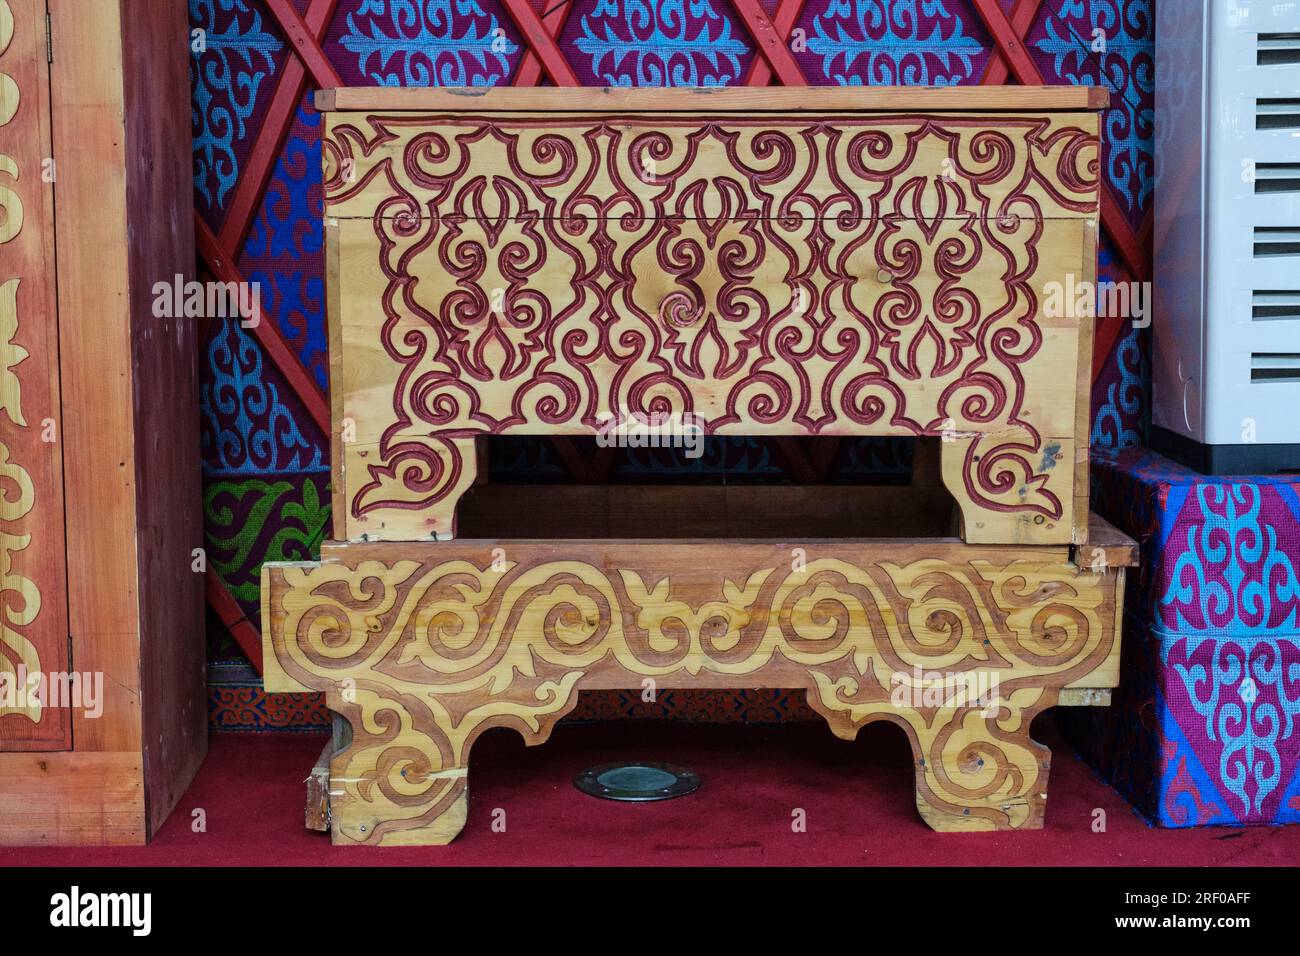 Kazakhstan, Almasai Gorge. Traditional Wood Carving Decorations on Furniture in a Restaurant. Stock Photo